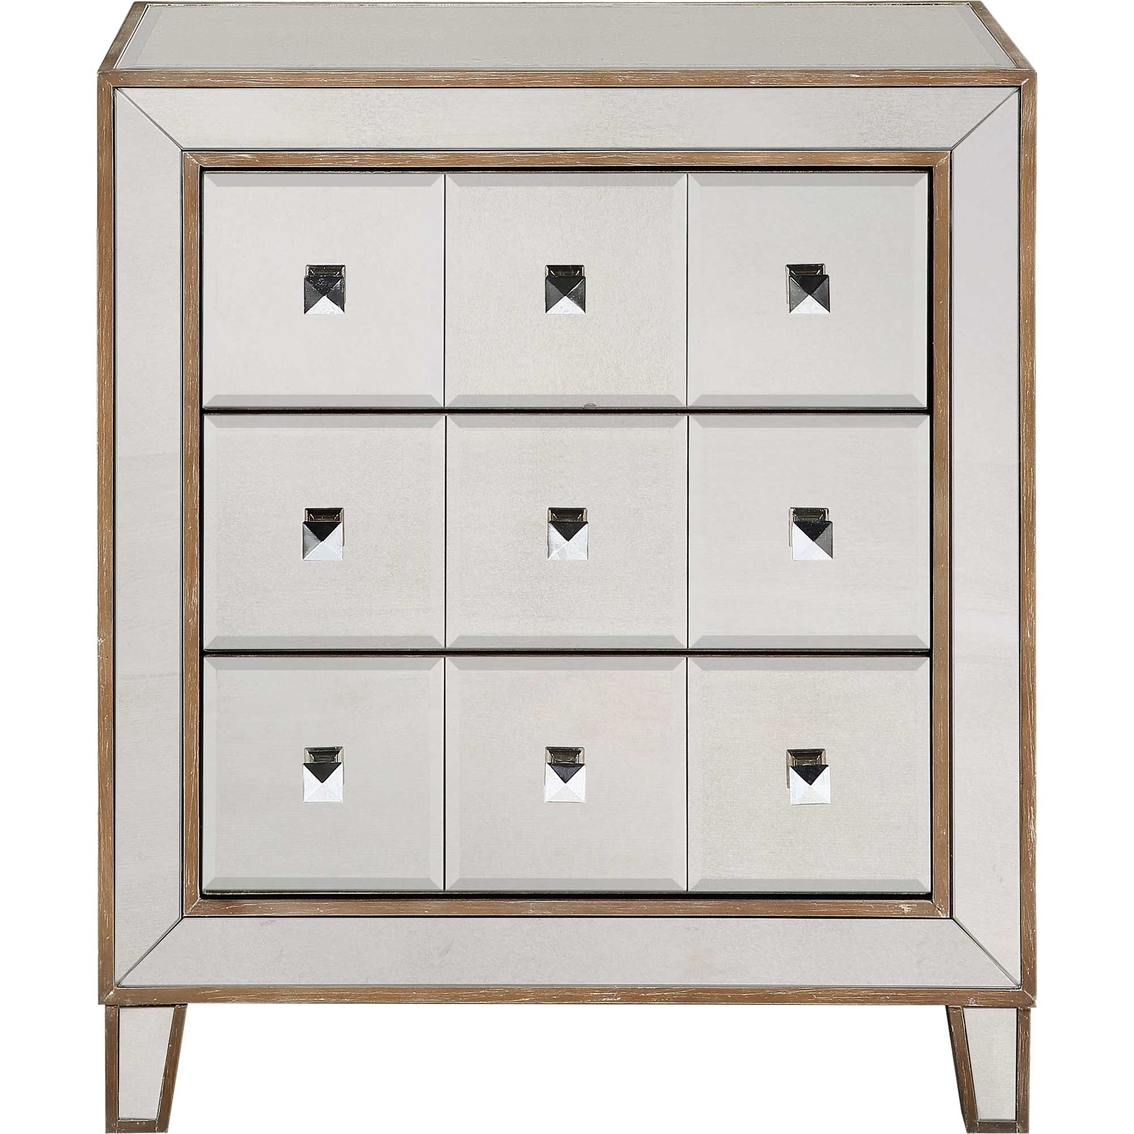 Coast to Coast Accents Bridget 3 Drawer Chest - Image 2 of 5